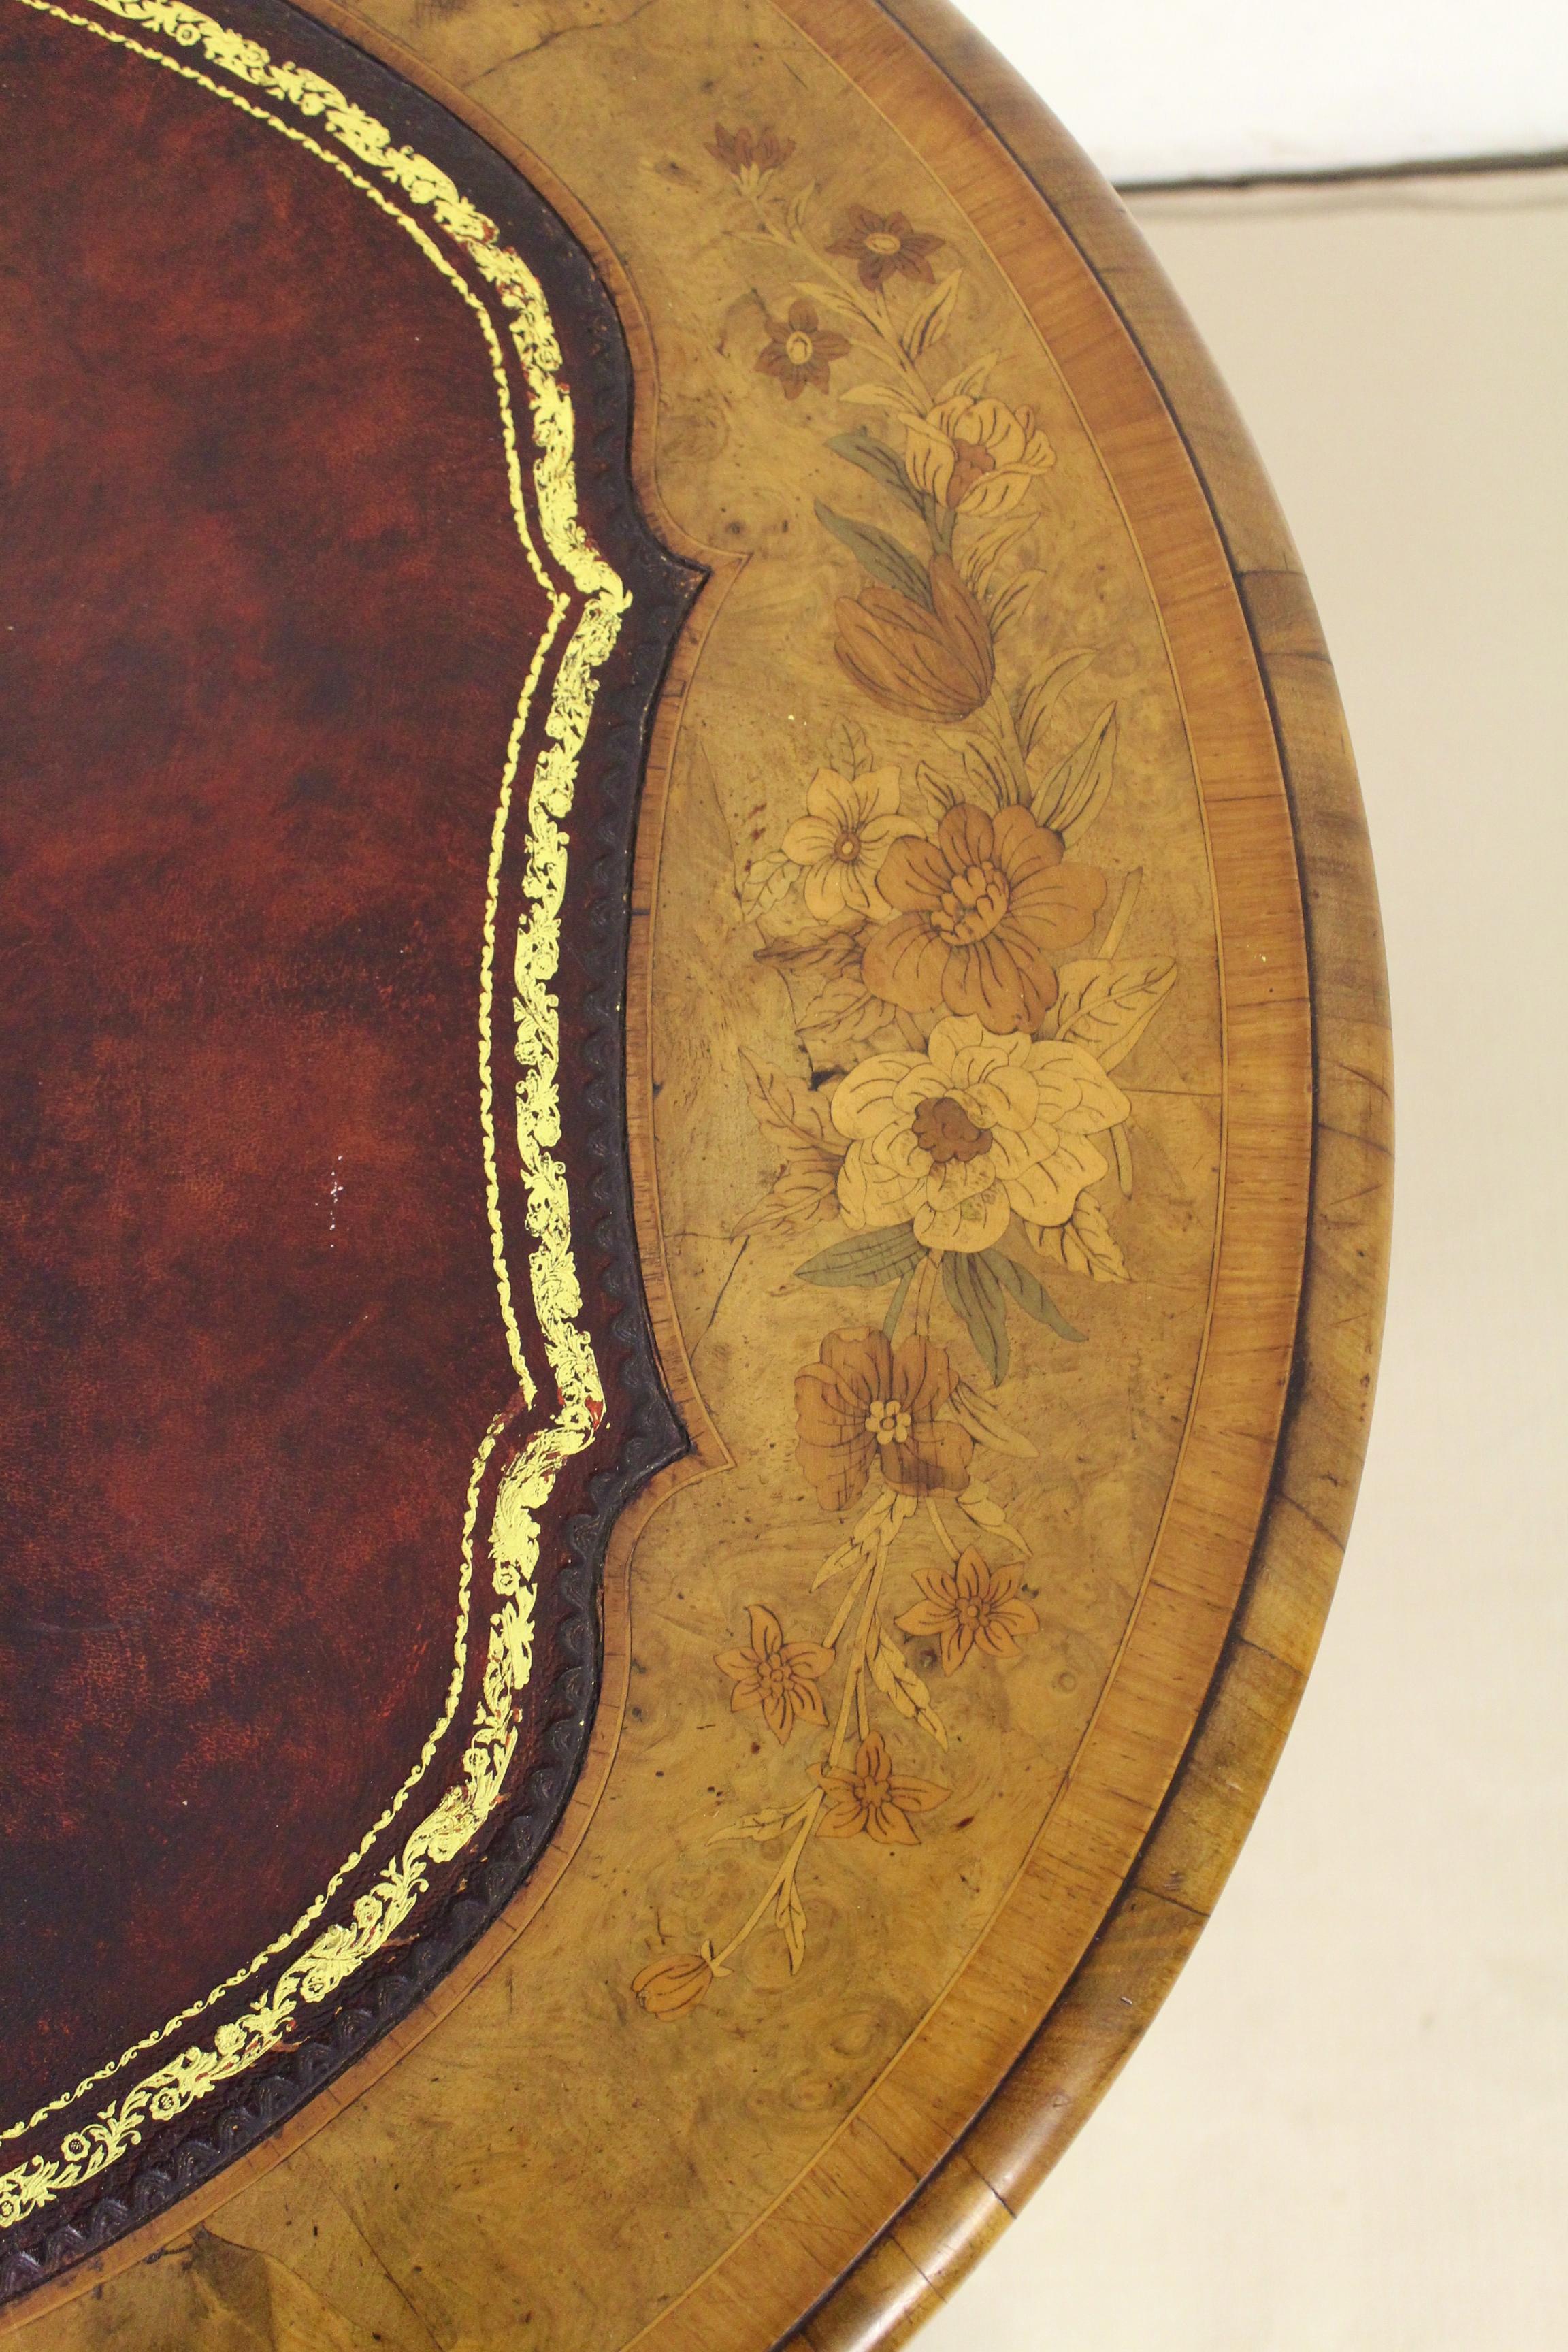 A wonderful and rare Victorian oval shaped burr walnut writing table. Of generous proportions and well made in walnut with attractive burr walnut veneers. The oval top is fitted with a sumptuous burgundy leather writing surface and is decorated with